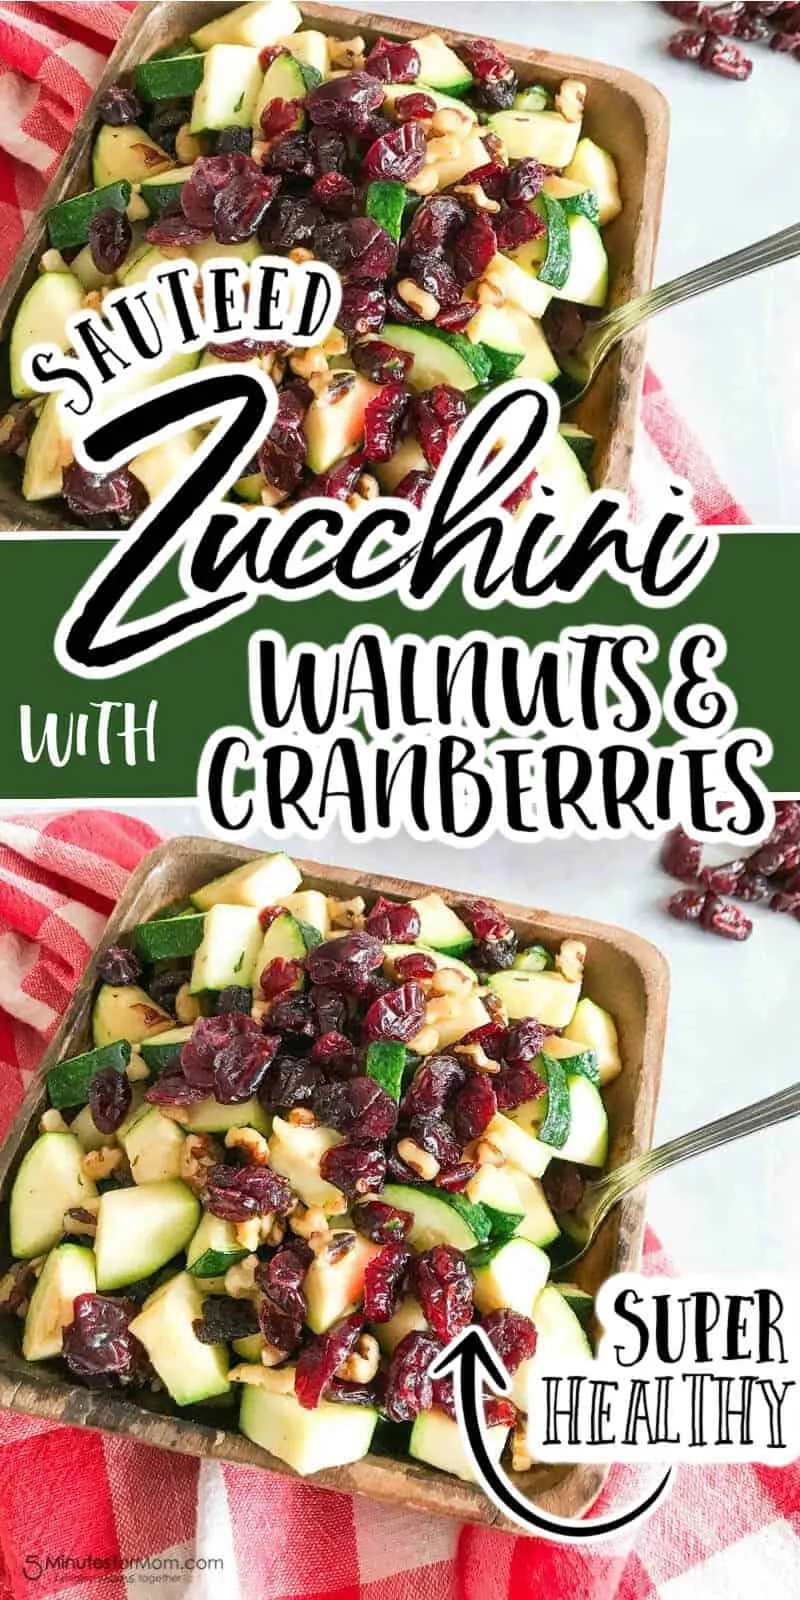 Sauteed Zucchini with Walnuts and Cranberries - Healthy Side Dish Recipe